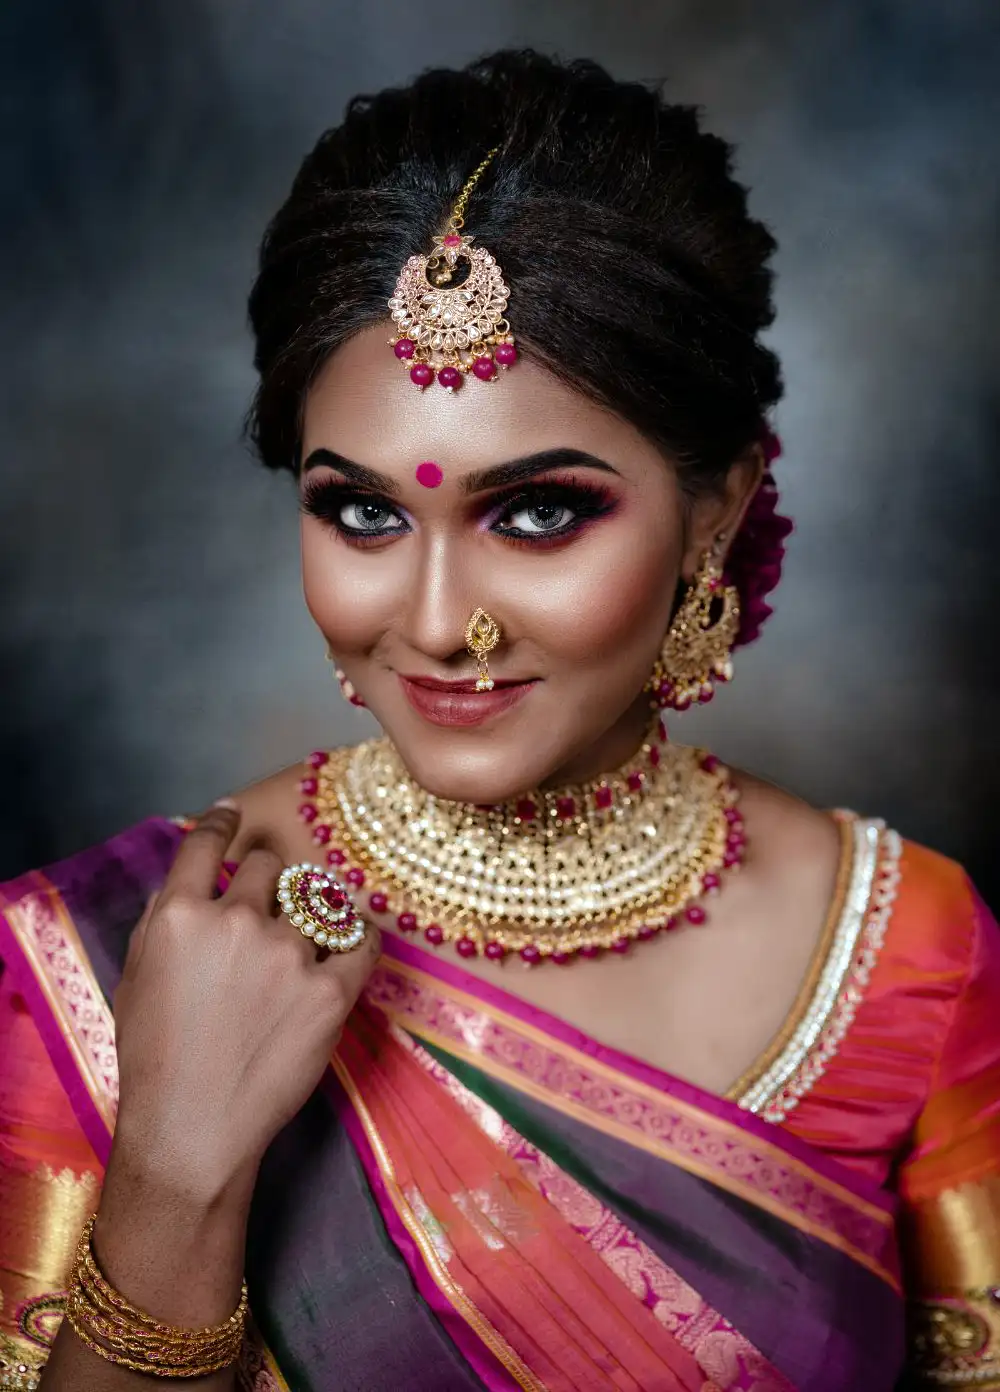 Beautiful Young Woman in Traditional Clothing and Jewellery with Bindi